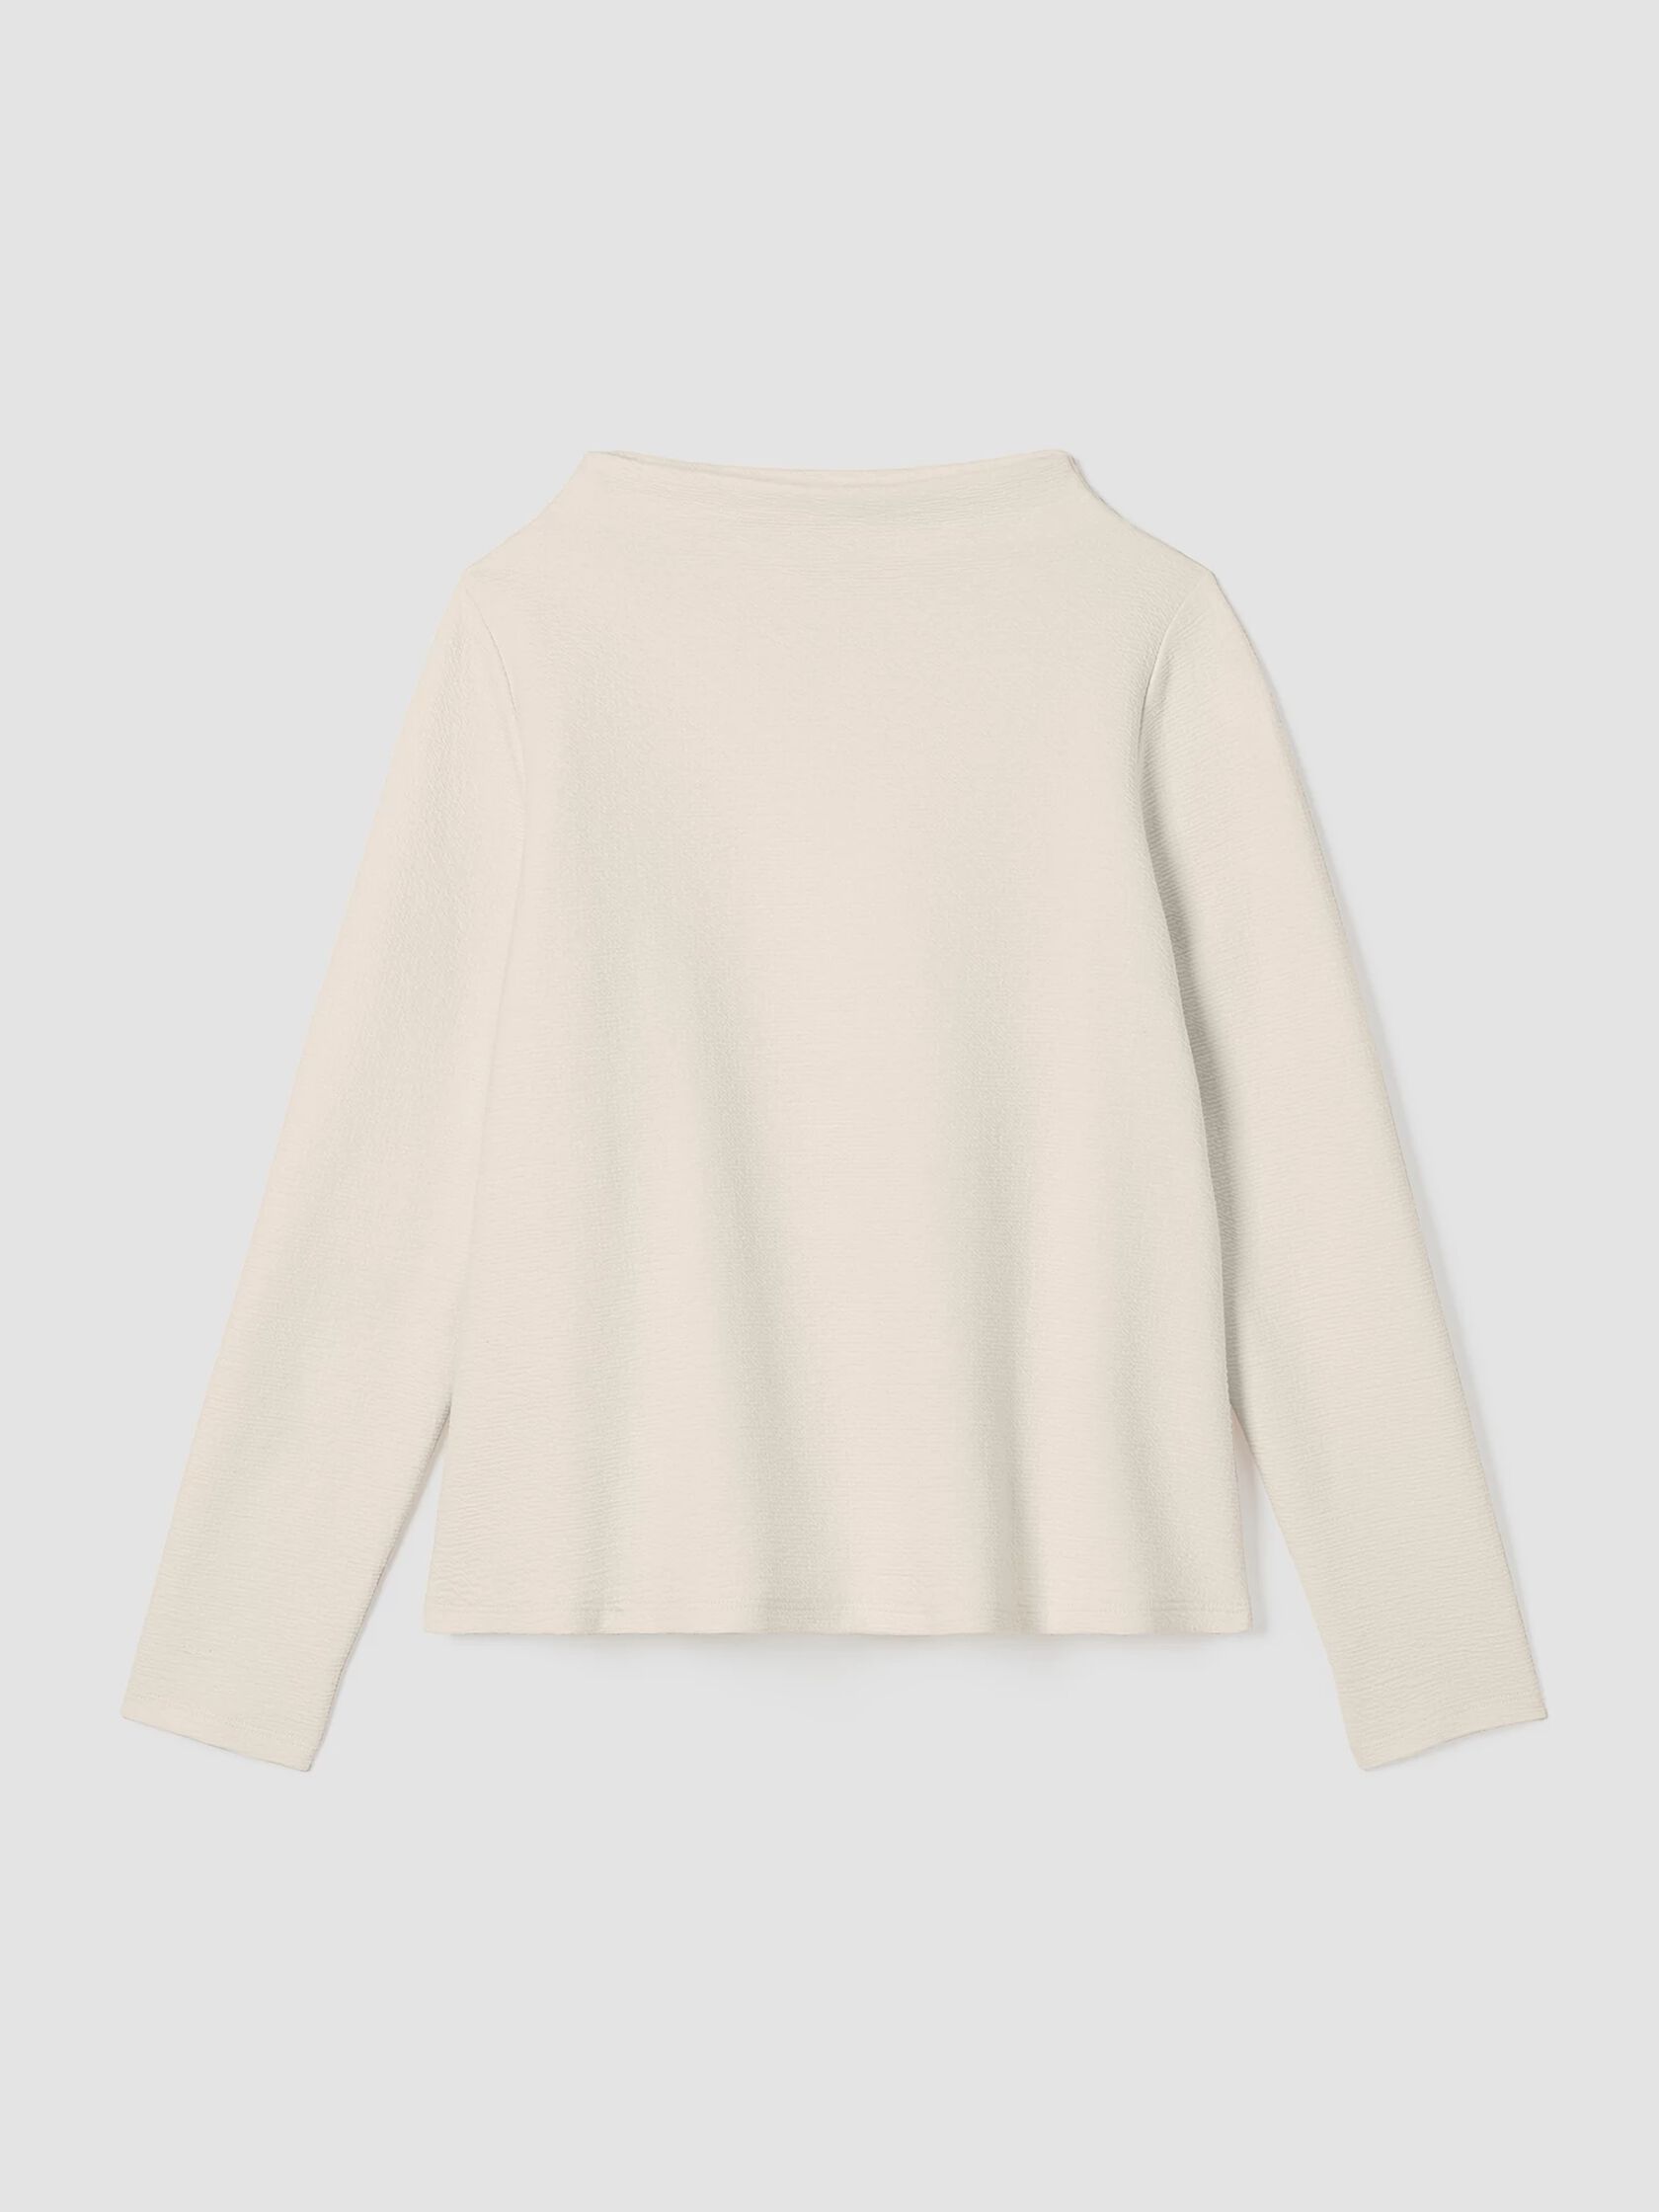 Organic Cotton Crinkled Knit Funnel Neck Top